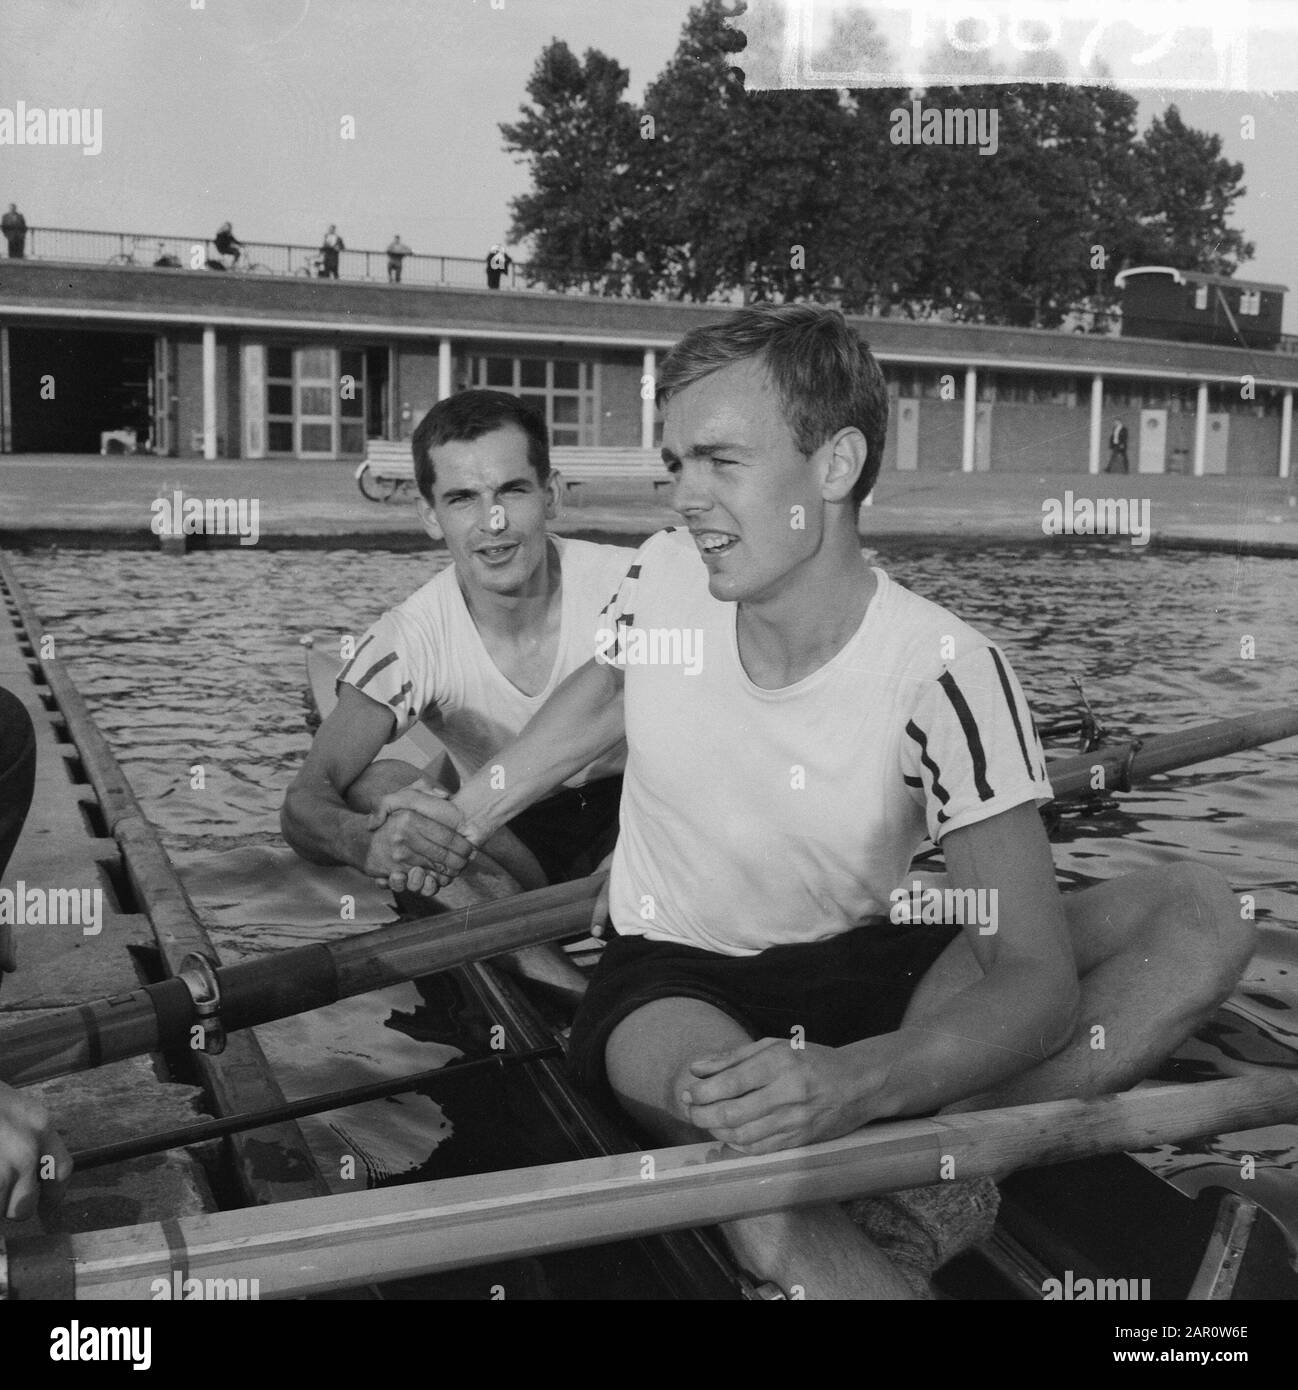 National championships rowing at the Bosbaan for men the two without mate Blaisse and Veenemans (Nereus) Date: 24 July 1964 Location: Amsterdam, Amsterdamse Bos, Bosbaan, Noord-Holland Keywords: CHAMPIES, ROWING, helmsmen Institution name: Nereus Stock Photo